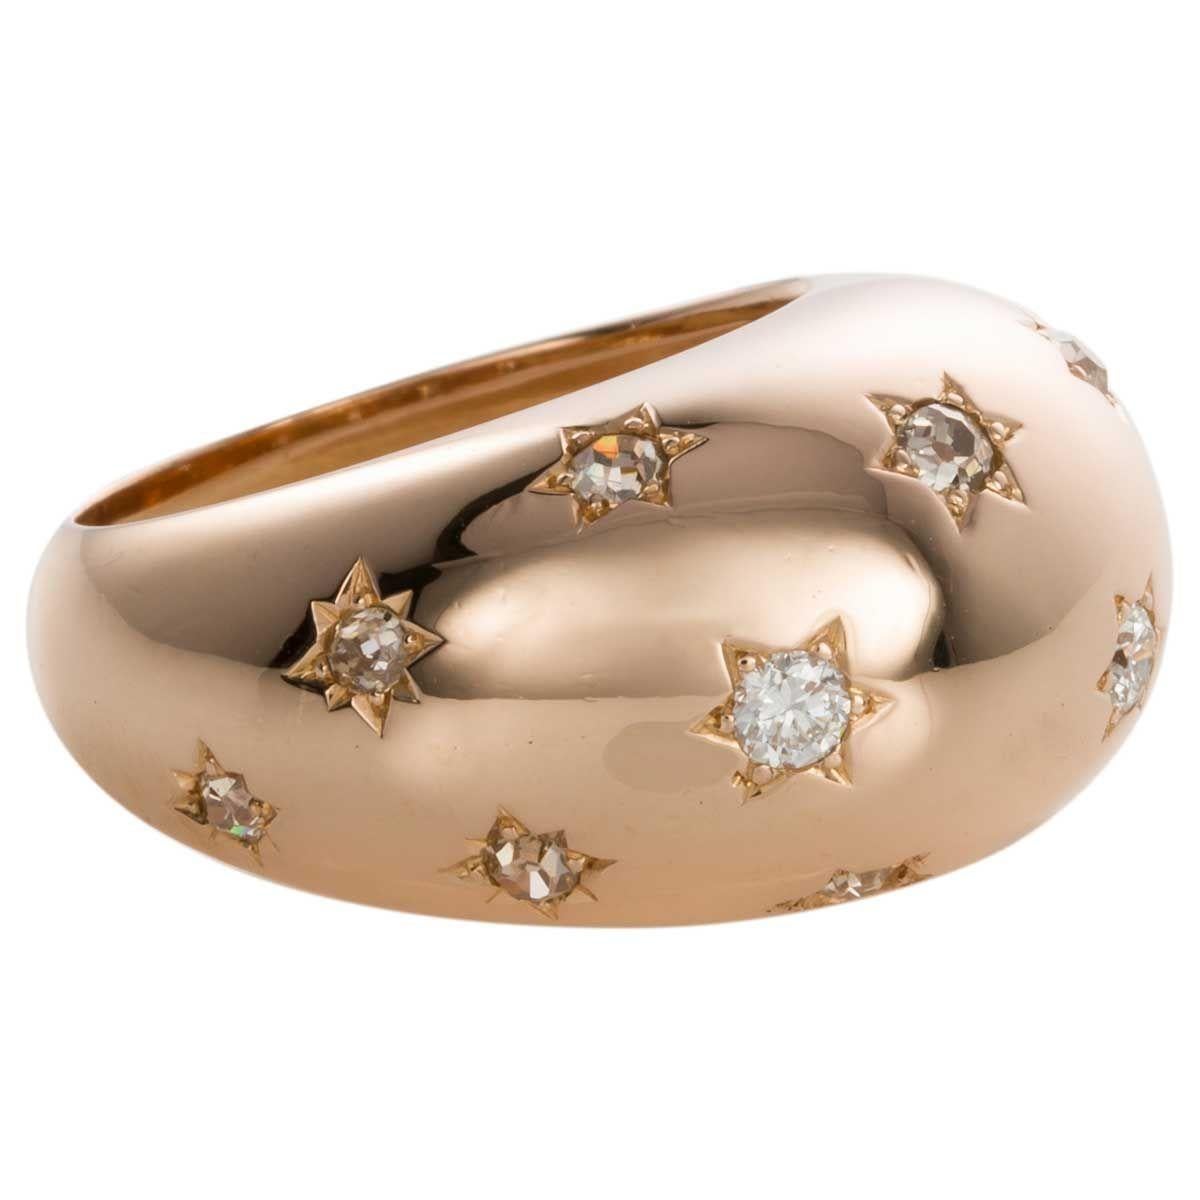 This ring ticks all the boxes. Firstly it's French and we know how beautiful the French make their jewels, secondly it has the perfect twinkle of starburst set diamonds and finally it has the most fabulous presence on the hand. These bombe rings are